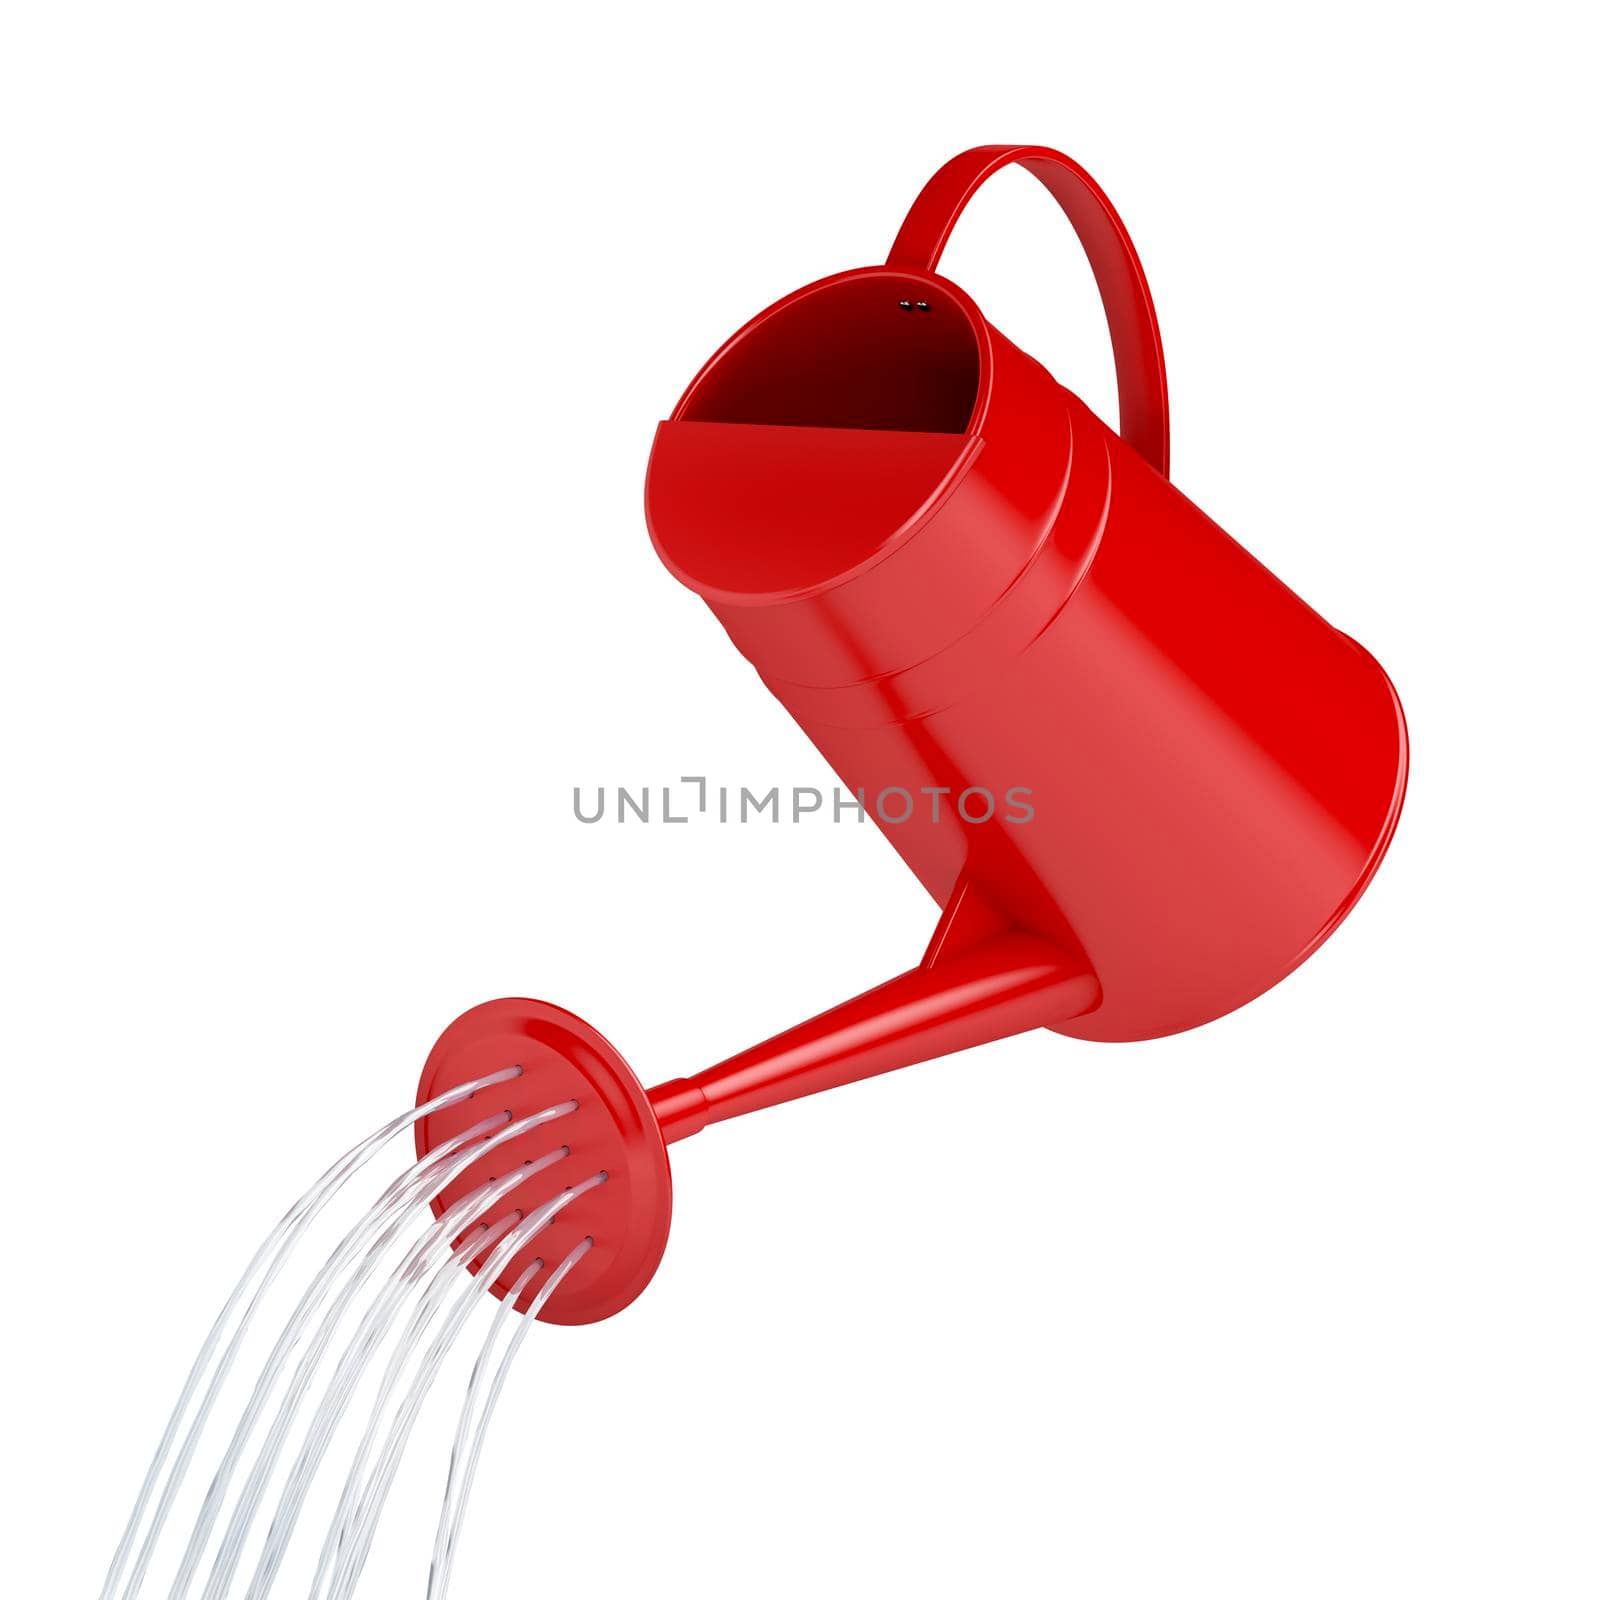 Water pours from a watering can on white background